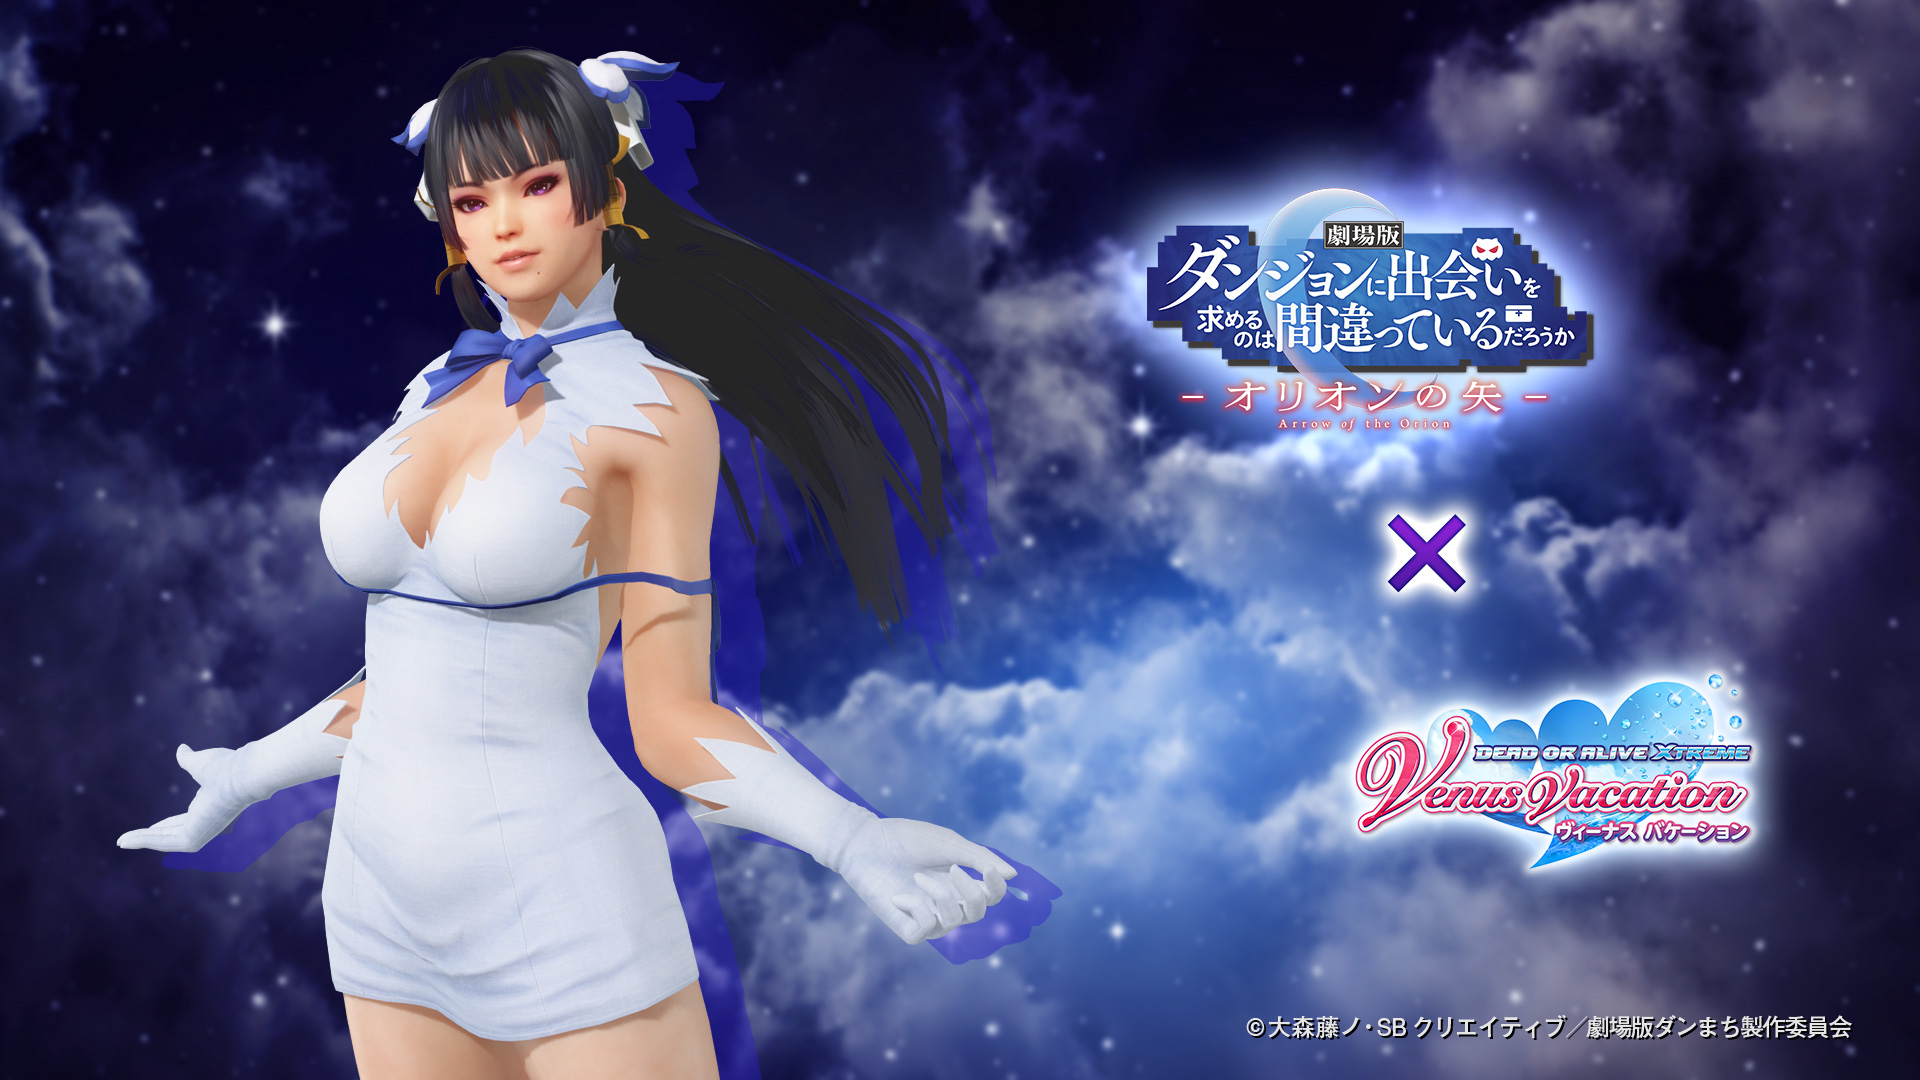 General 1920x1080 Dead or Alive dead or alive xtreme venus vacation video games boobs black hair long hair video game girls video game characters video game warriors